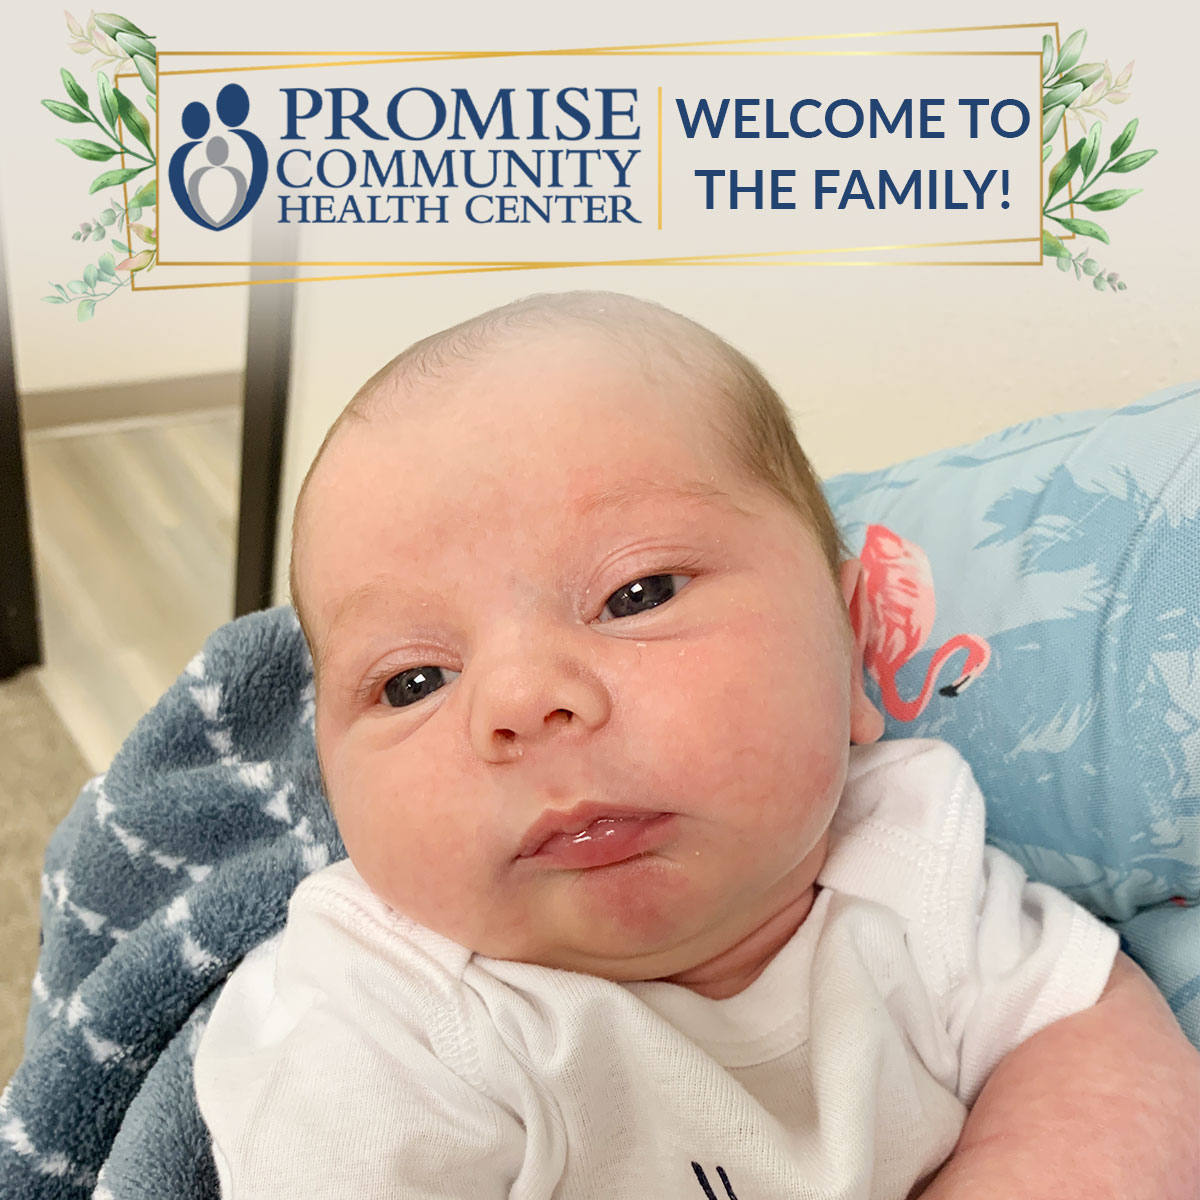 Home birth in Sioux Falls, South Dakota |Promise Community Health Center in Sioux Center, Iowa | Home births in northwest Iowa, Home births in southeast South Dakota, Home births in southwest Minnesota | Home births in Sioux Falls South Dakota, Home births in Beresford South Dakota, Home births in Sioux City IA, Home births in LeMars IA, Home births in Worthington MN, Home births in Iowa, Home births in South Dakota, Home births in Minnesota